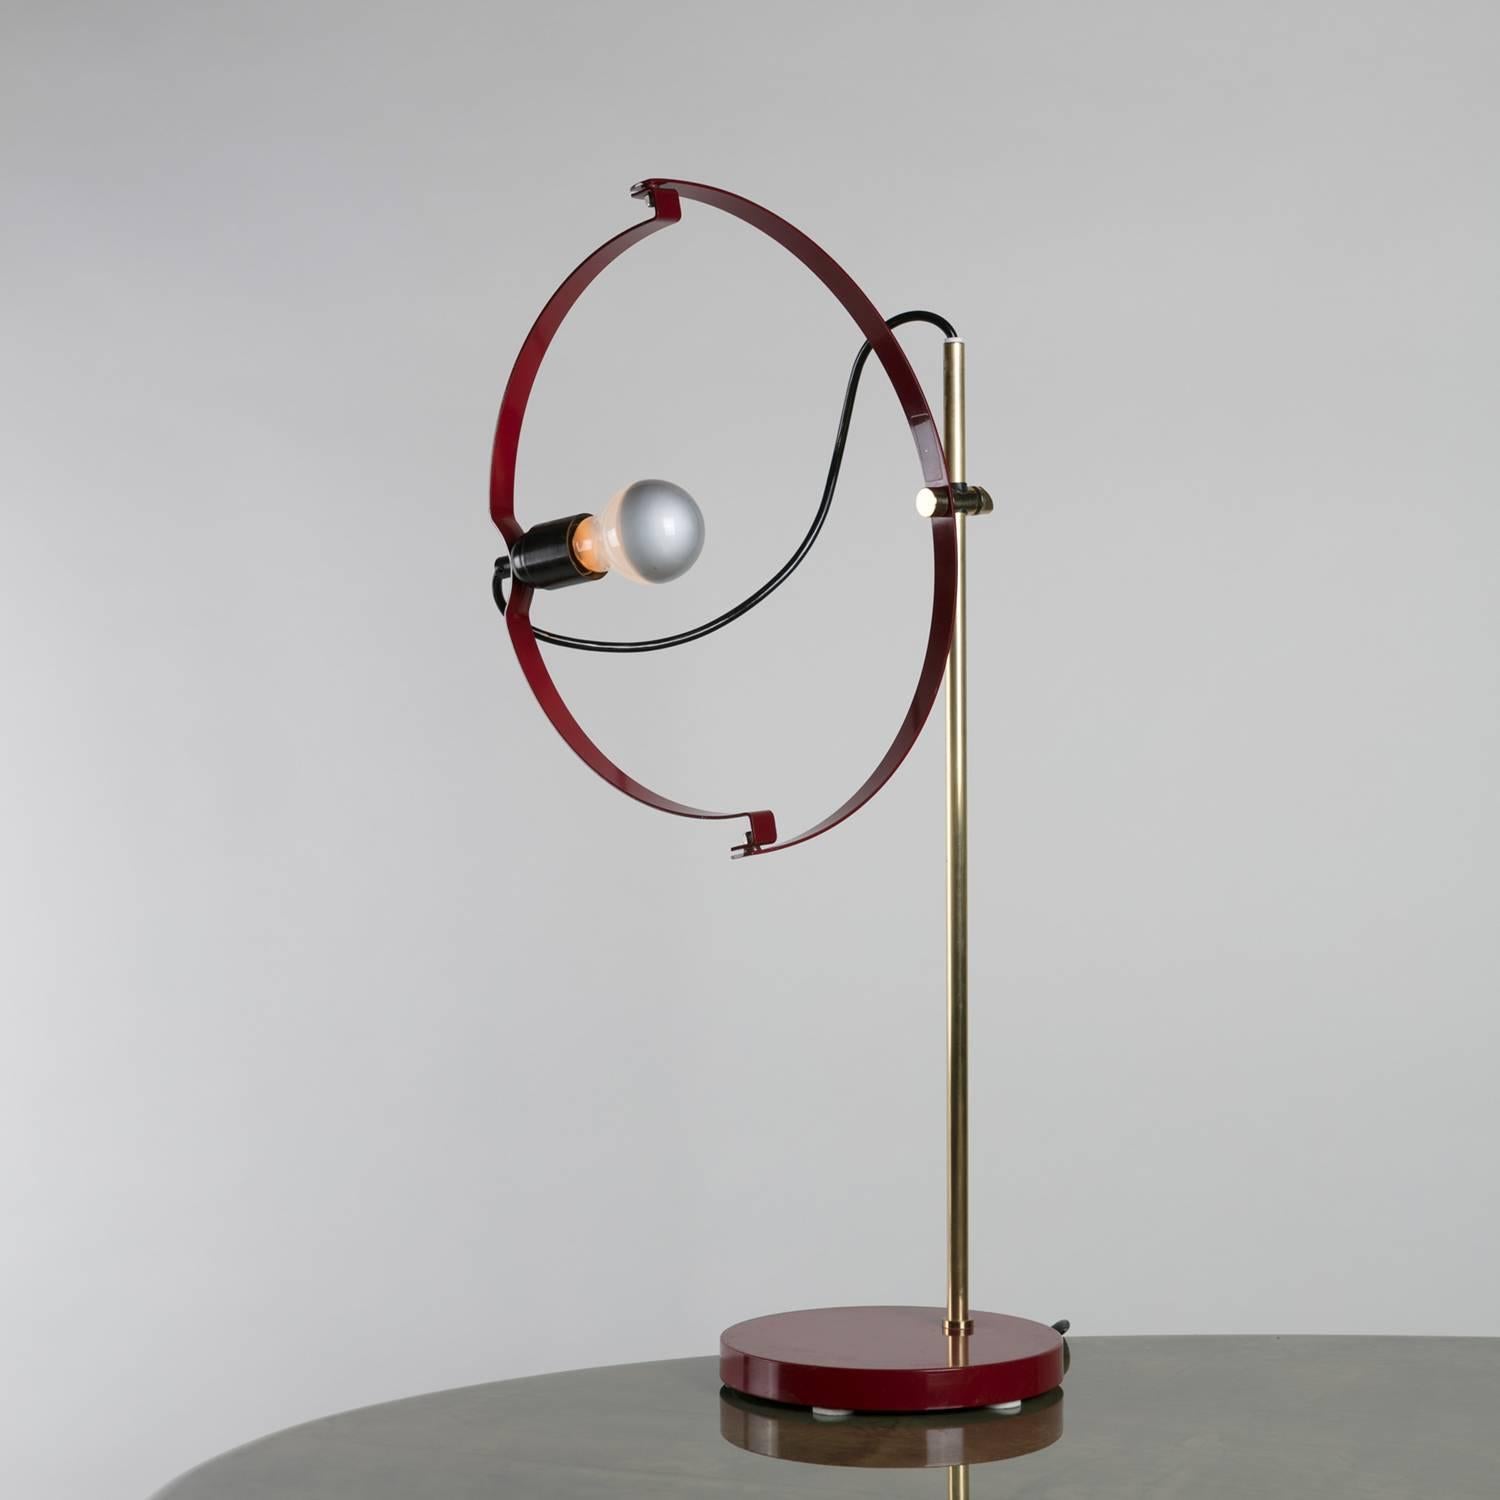 Remarkable table lamp by Reggiani.
Revolving semi-circular arms allow the light source to be freely positioned.